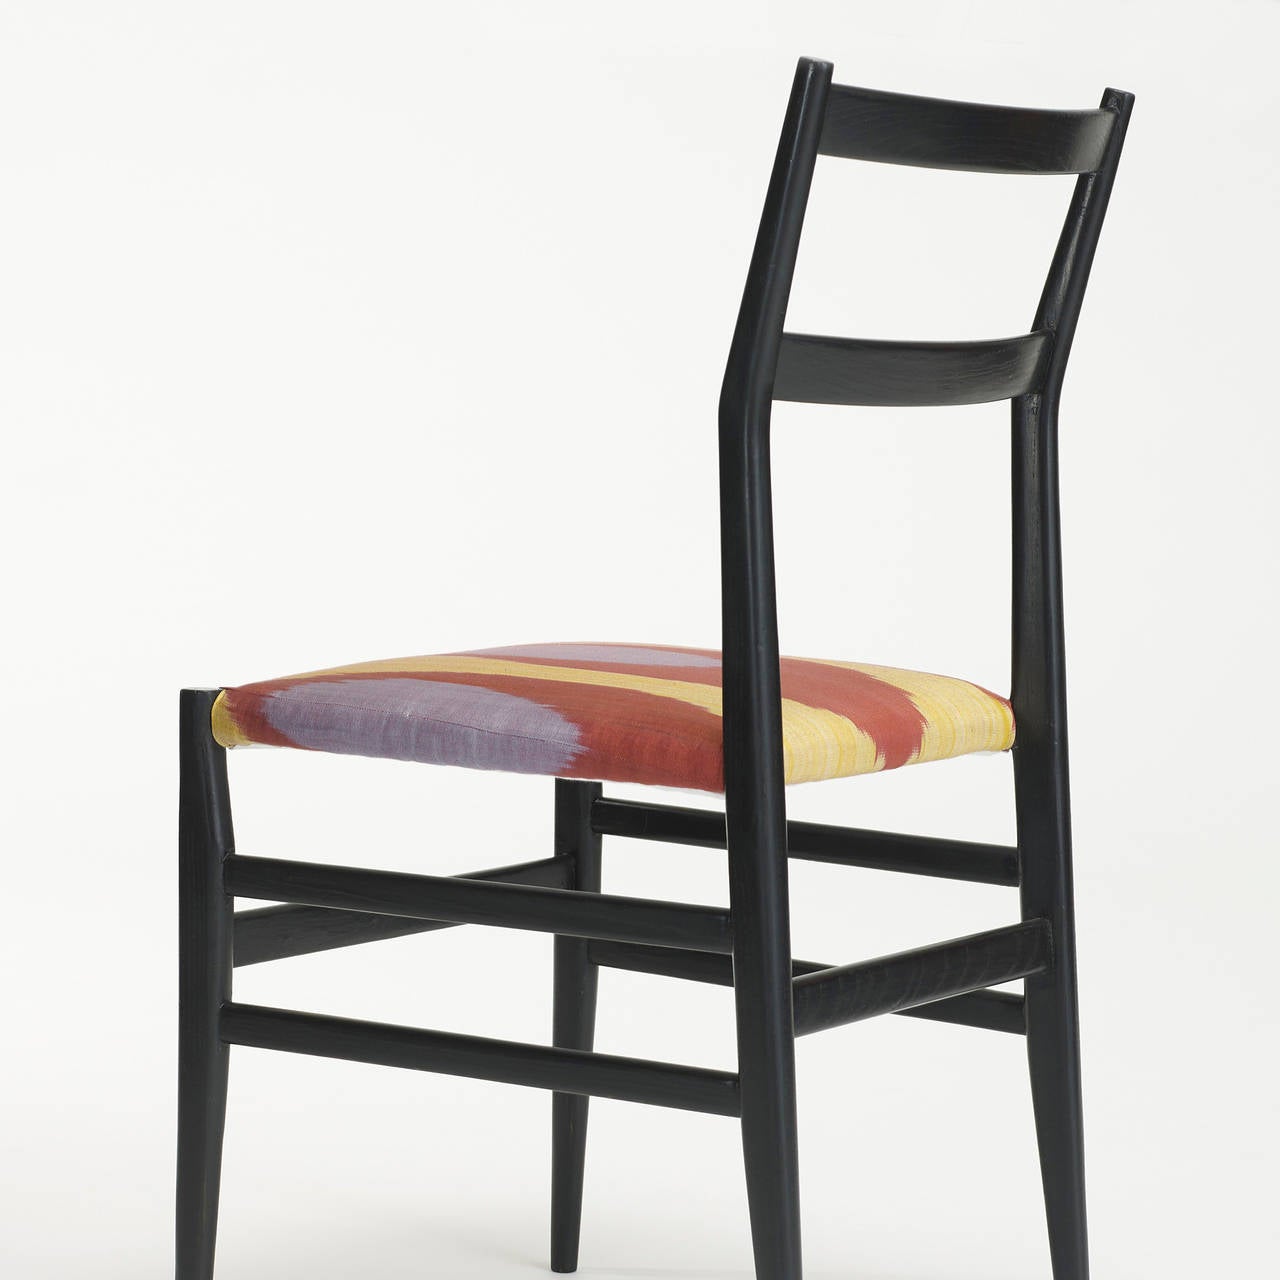 Lacquered Leggera Chairs, Set of Six by Gio Ponti for Cassina